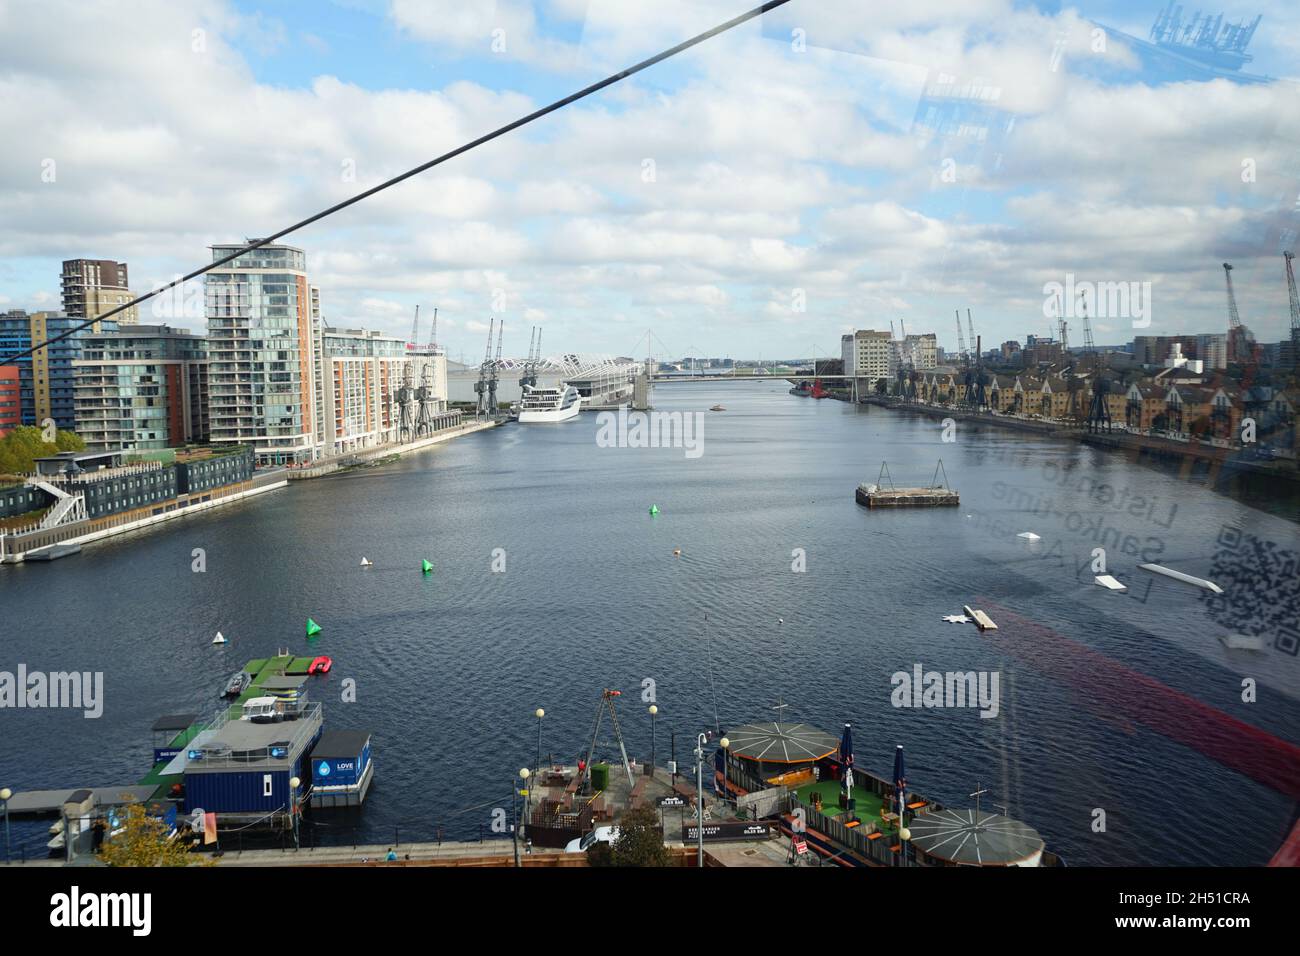 A view of the Thames River from the Emirates Cable car zip lining over the Thames from the Greenwich Peninsula to the Excel Centre at the Royal Docks Stock Photo